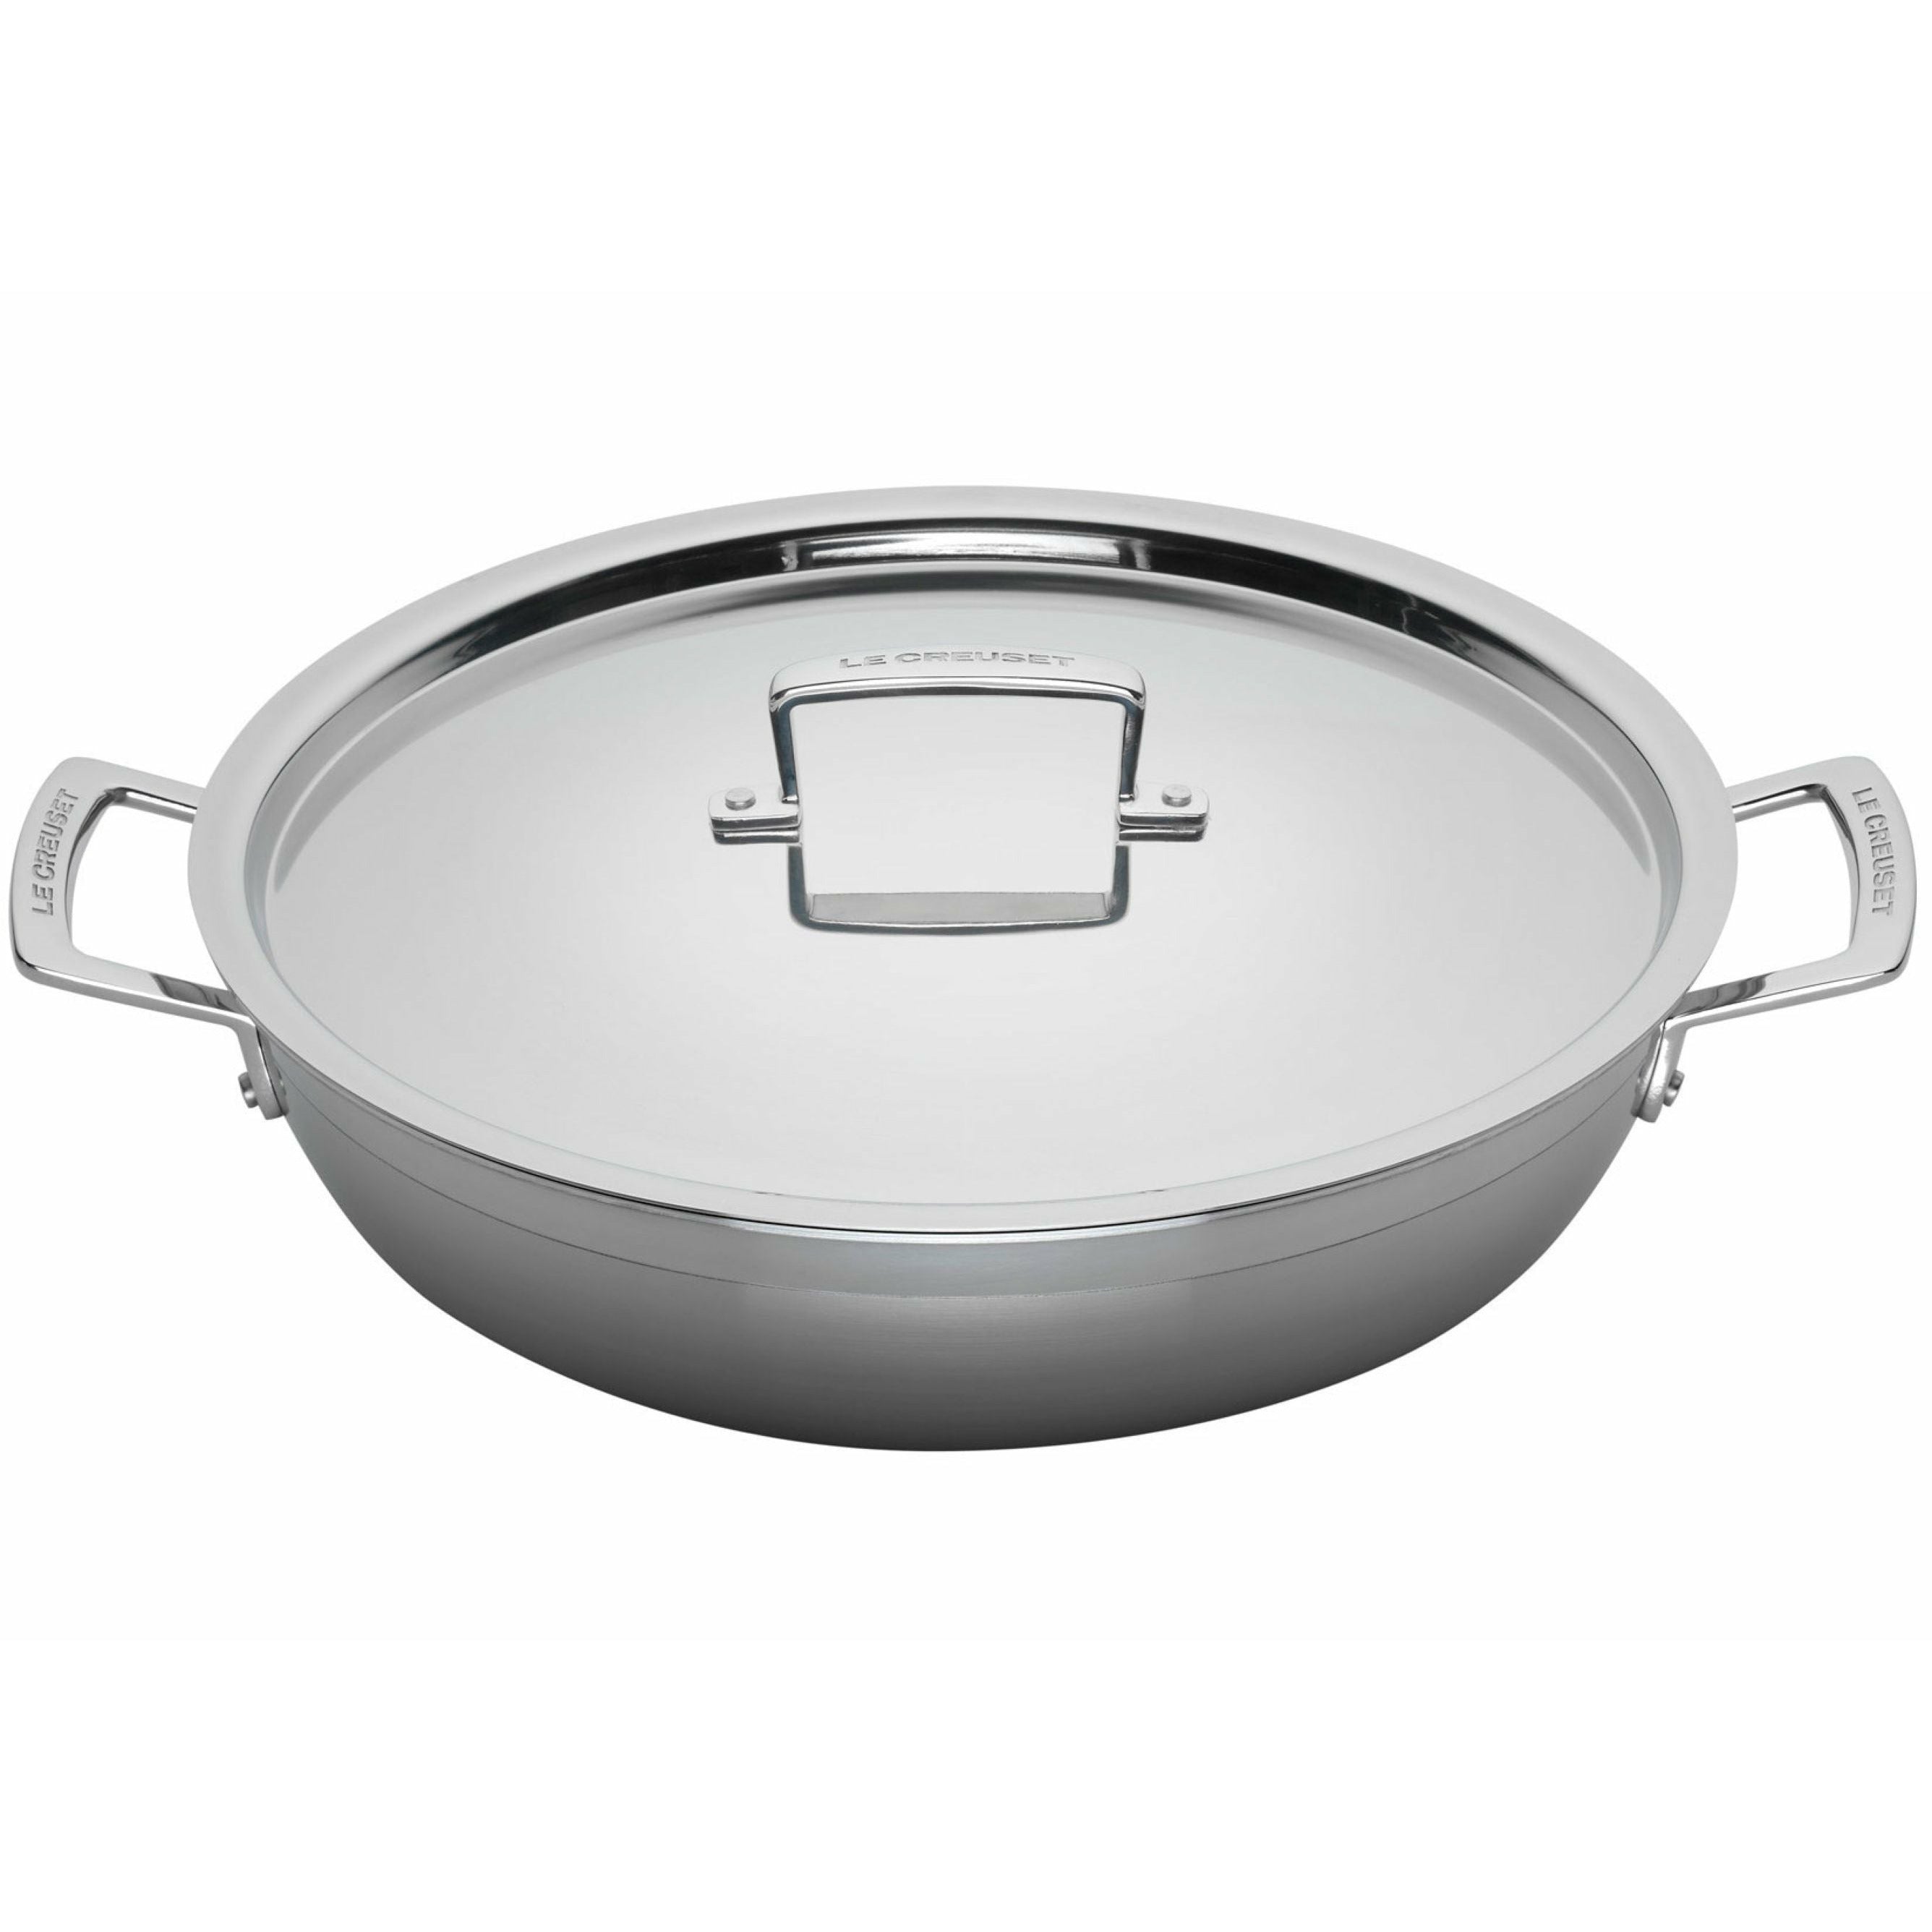 Le Creuset 3 Ply Professional Pan With Lid Non Stick, 30 Cm